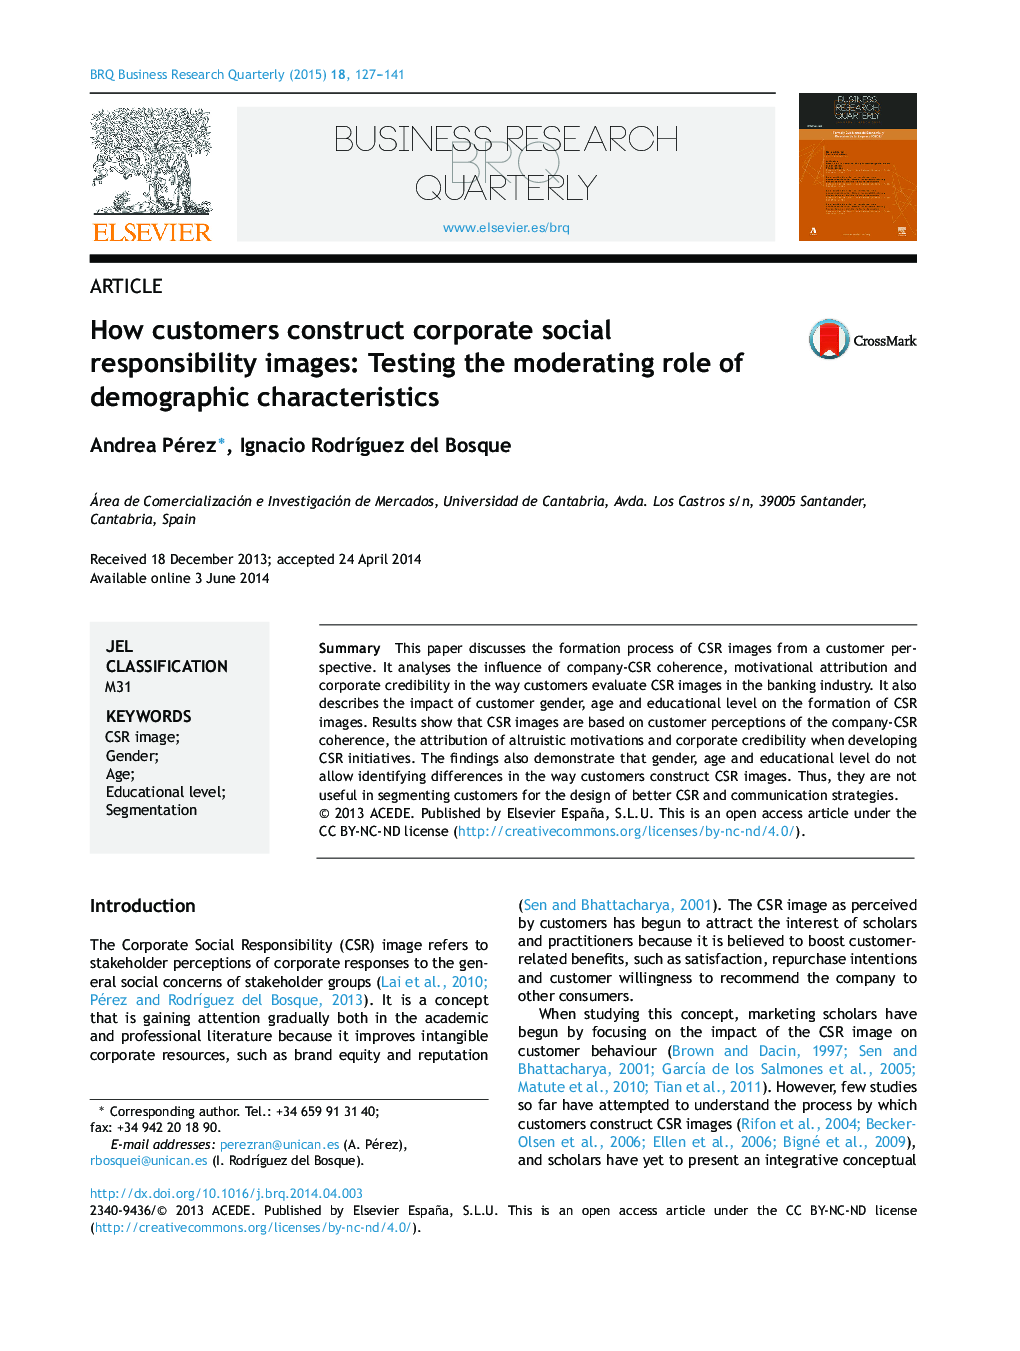 How customers construct corporate social responsibility images: Testing the moderating role of demographic characteristics